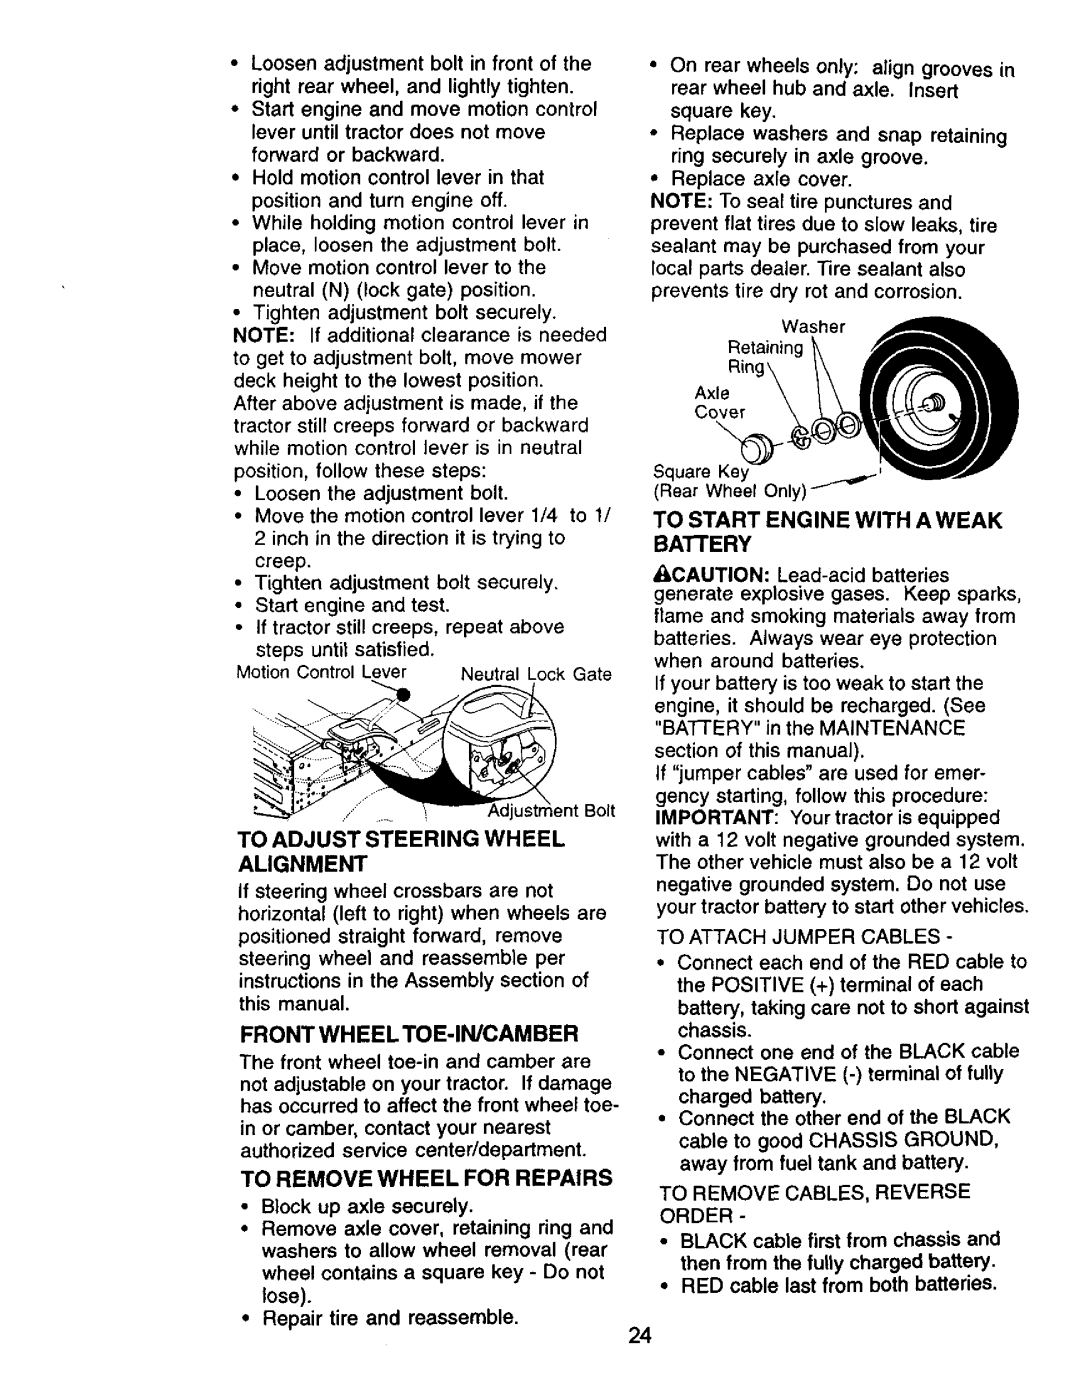 Craftsman 917.271061 owner manual Front Wheel Toe-In/Camber, To Start Engine With A Weak Baiiery 